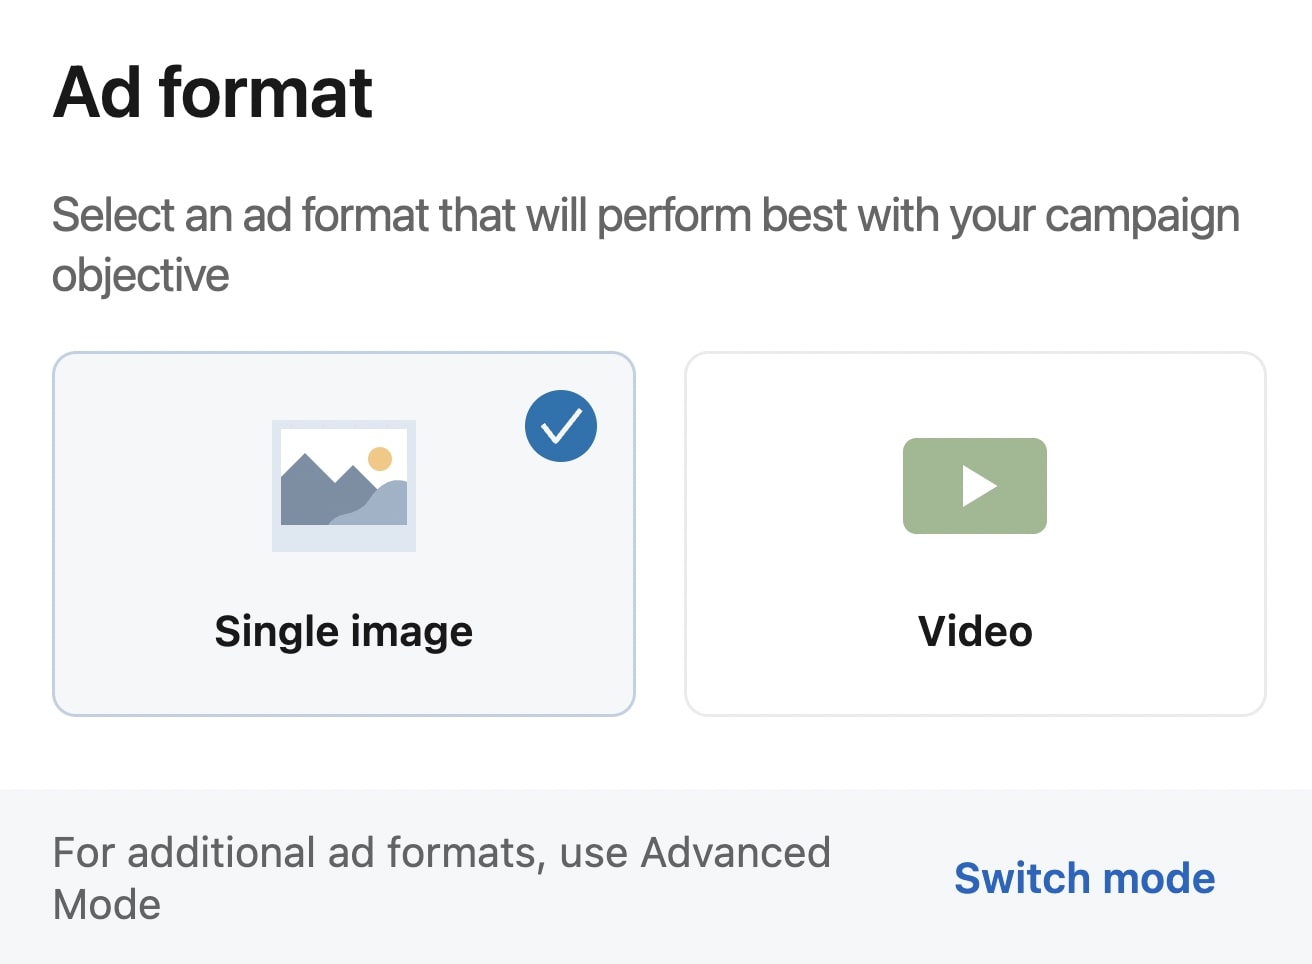 LinkedIn ad format options - single image and video - with check mark next to single image